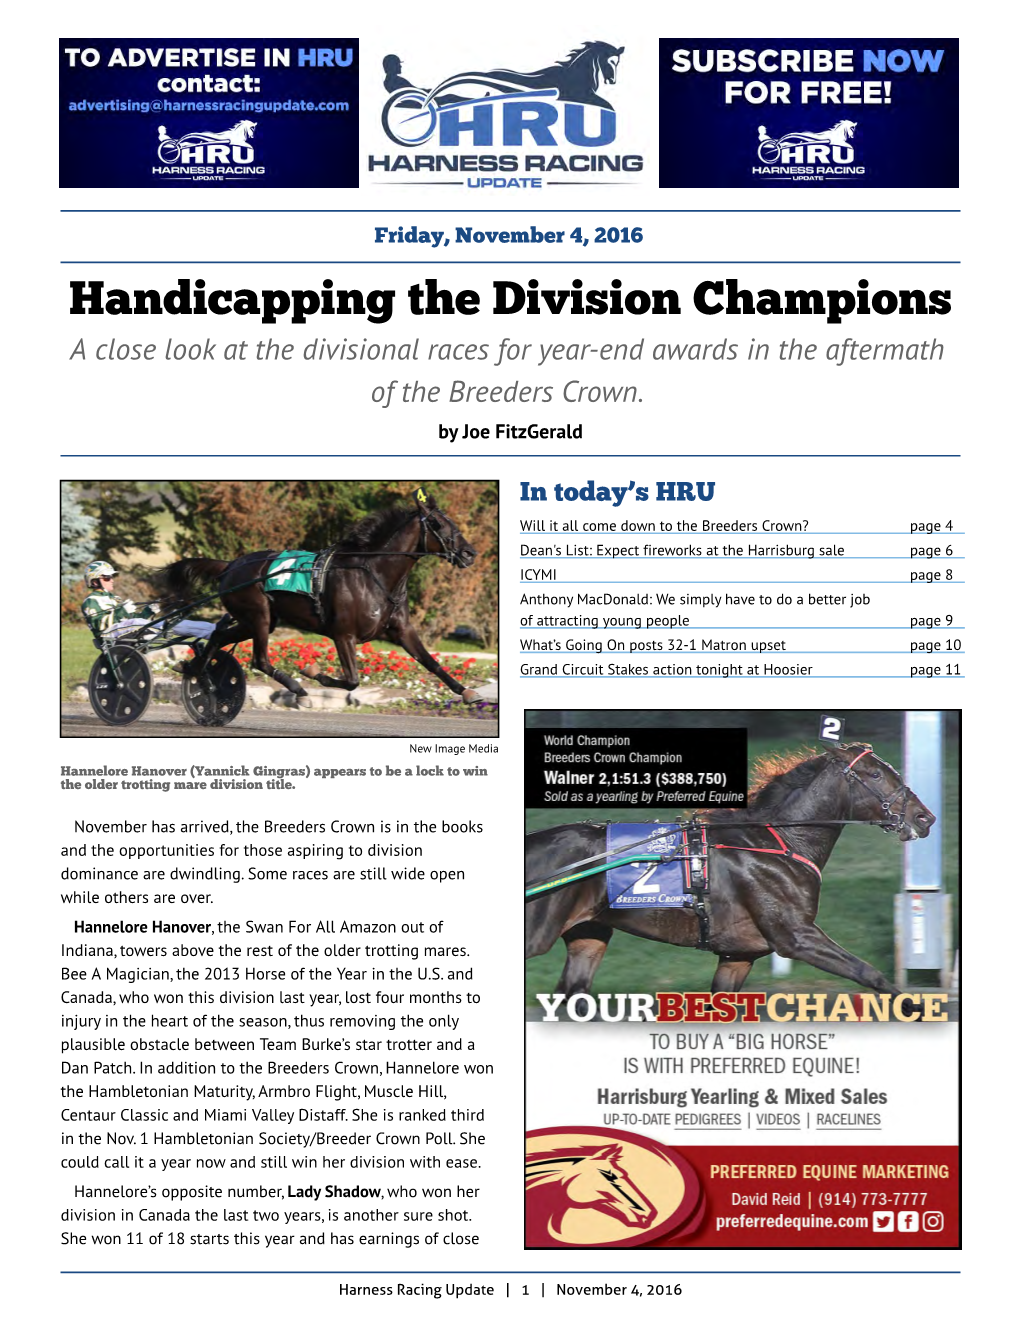 Handicapping the Division Champions a Close Look at the Divisional Races for Year-End Awards in the Aftermath of the Breeders Crown